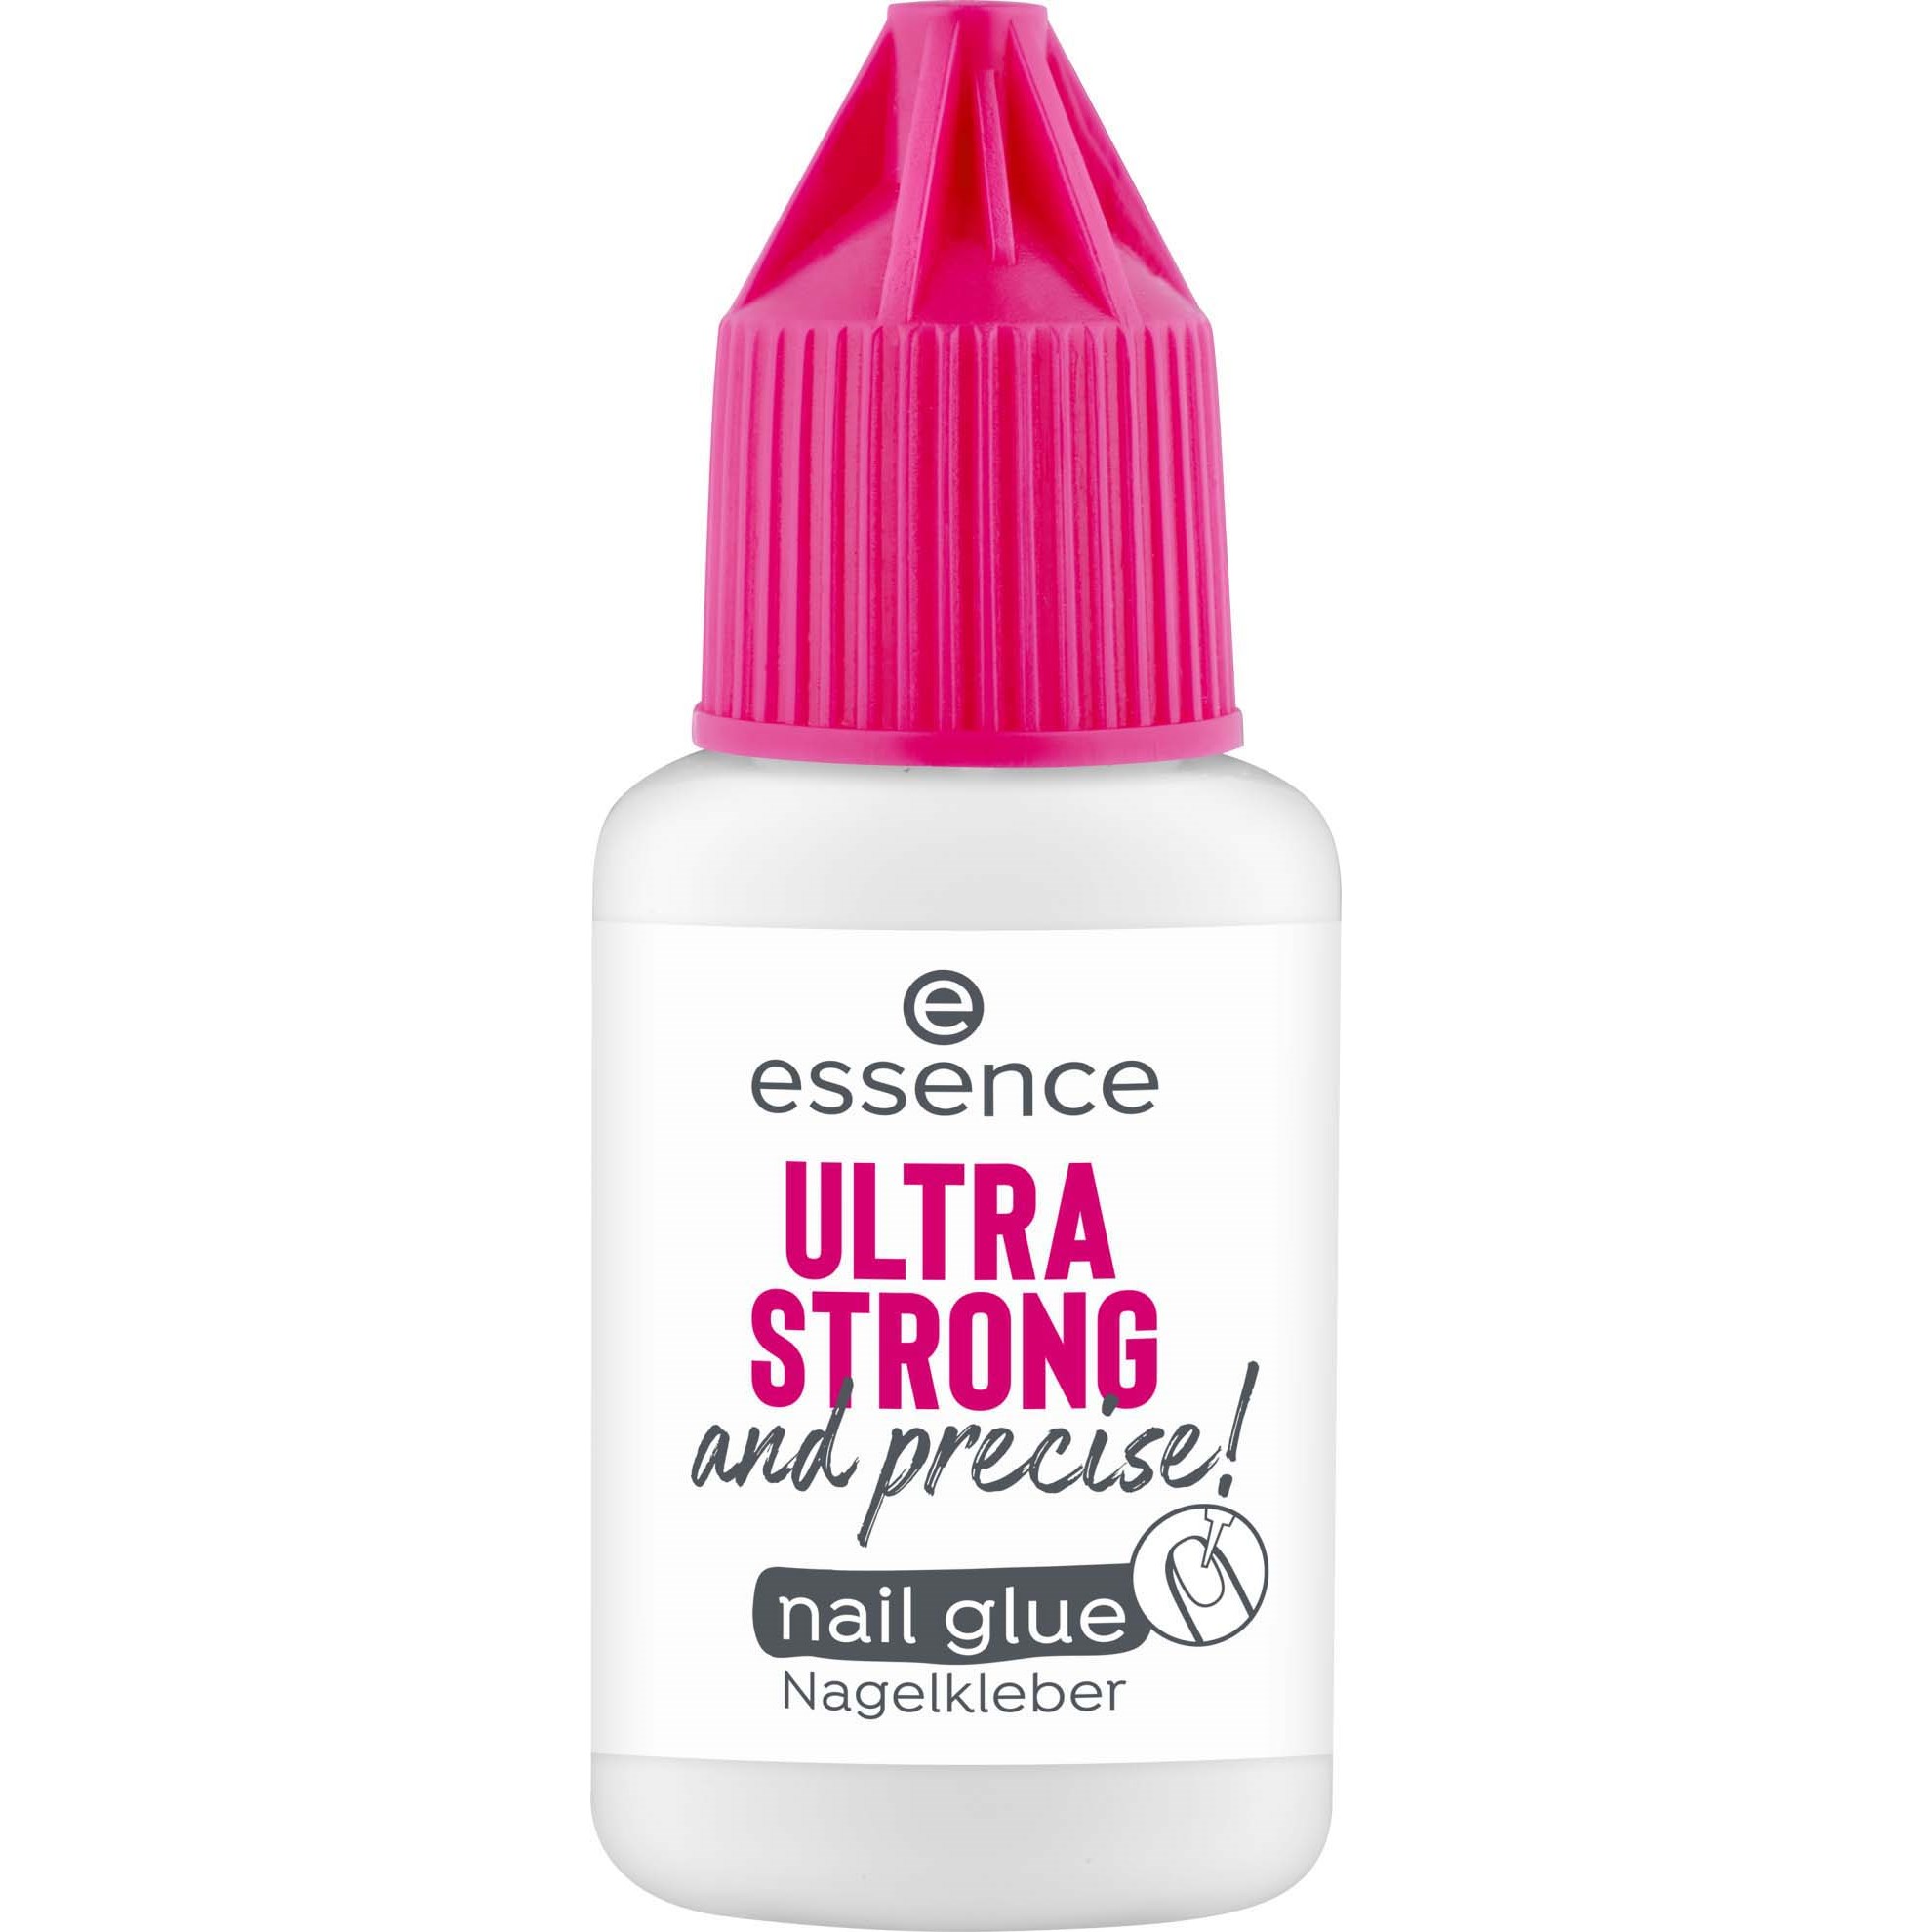 Läs mer om essence Ultra Strong And Precise! Nail Glue